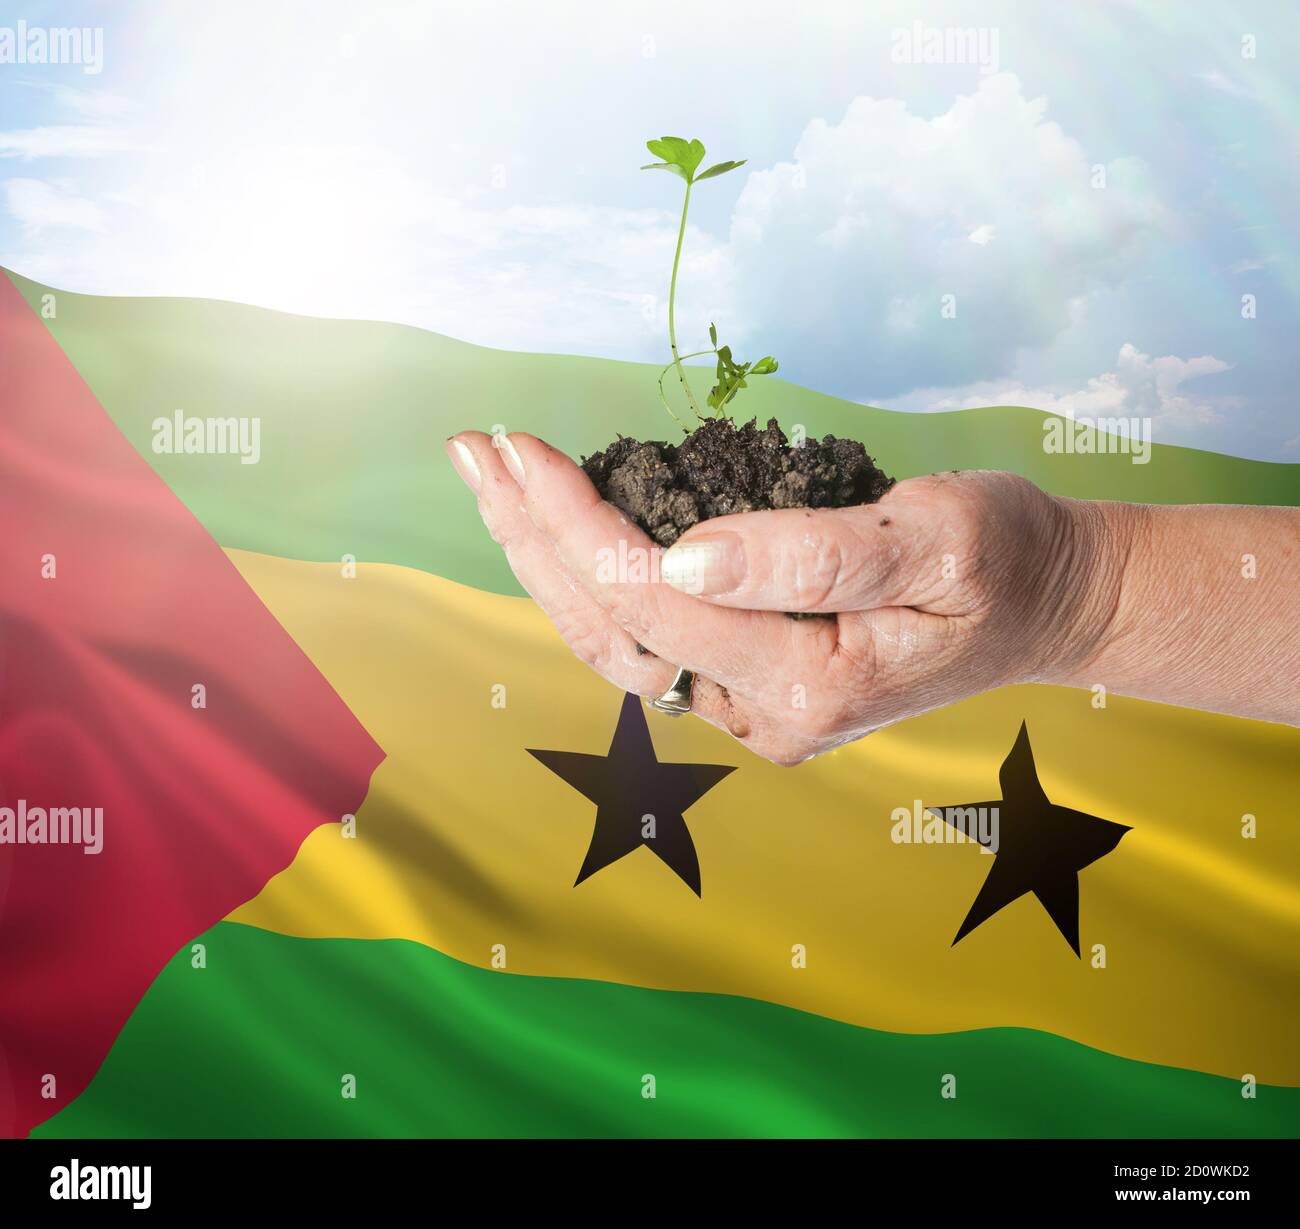 Sao Tome and Principe growth and new beginning. Green renewable energy and ecology concept. Hand holding young plant. Stock Photo